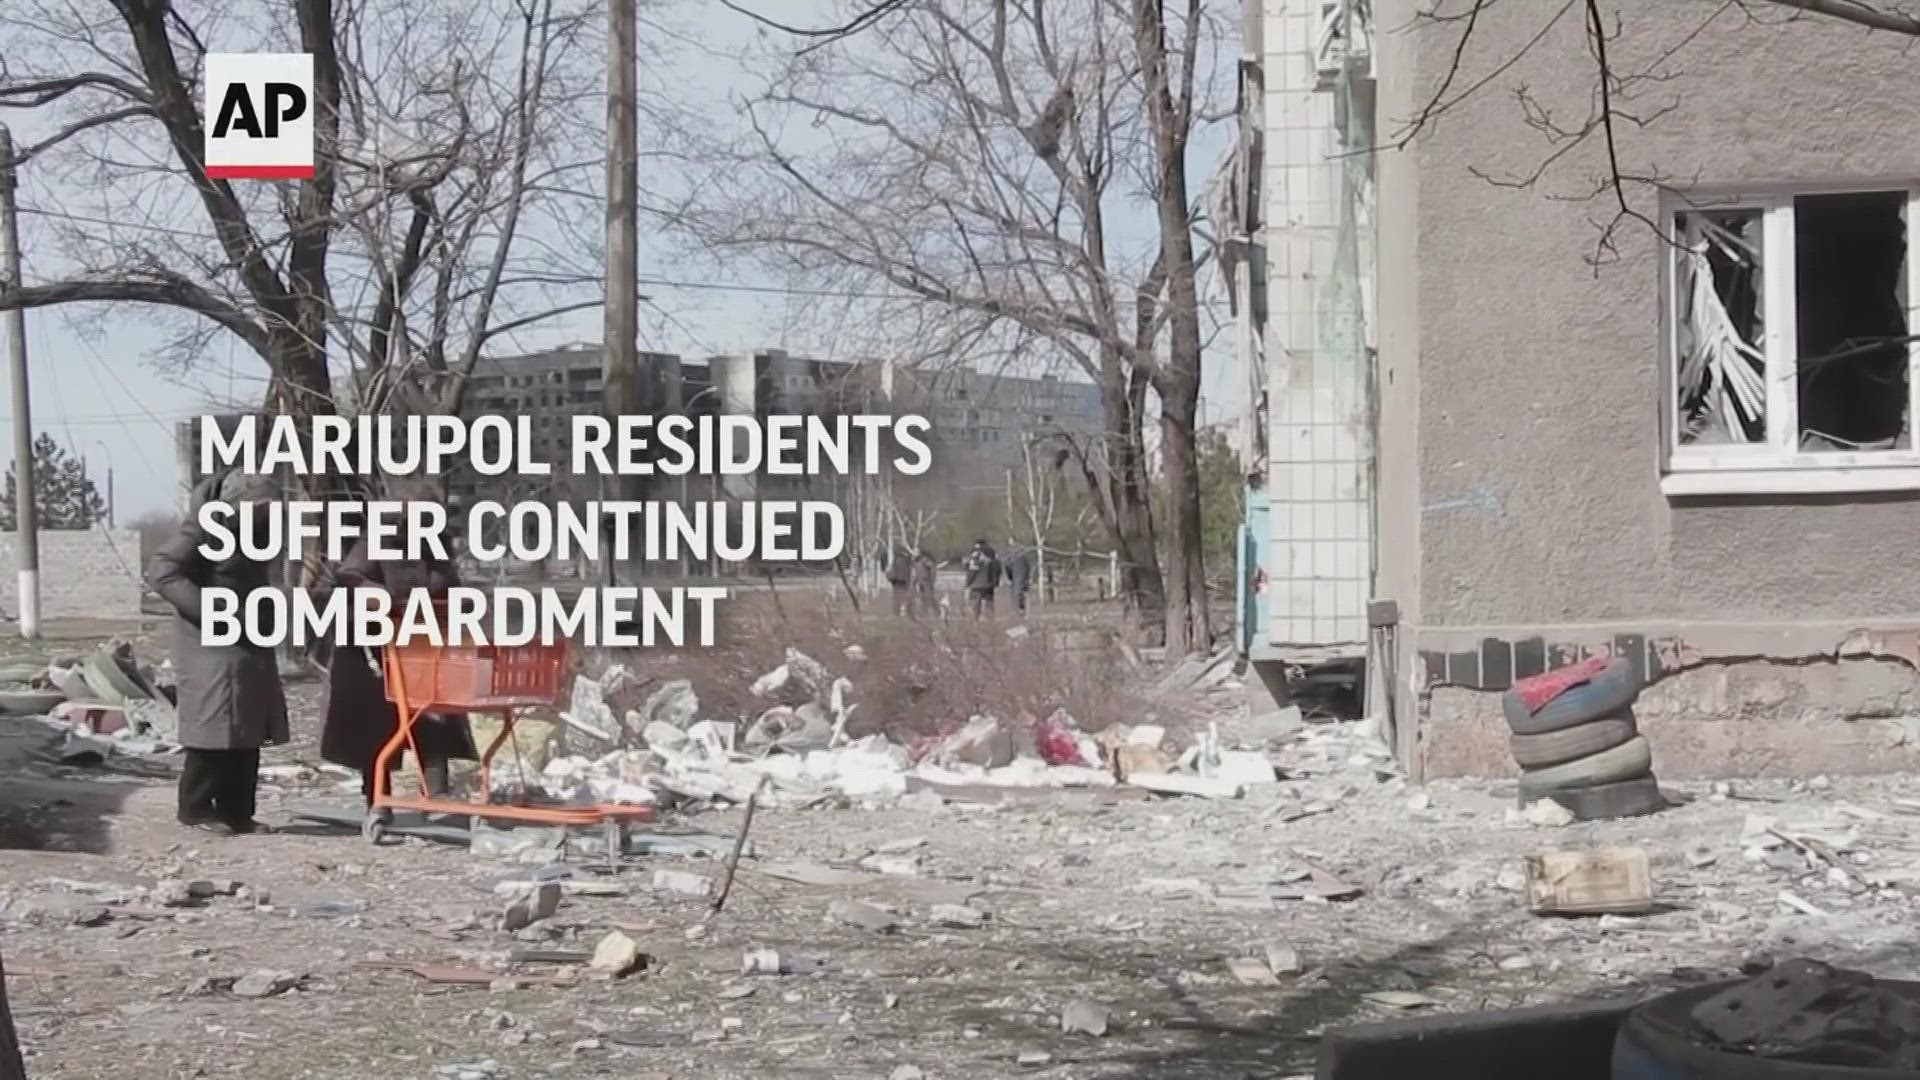 Mariupol officials said at least 2,300 people have died in the siege, with some buried in mass graves, but fears grew that the number could be far higher.